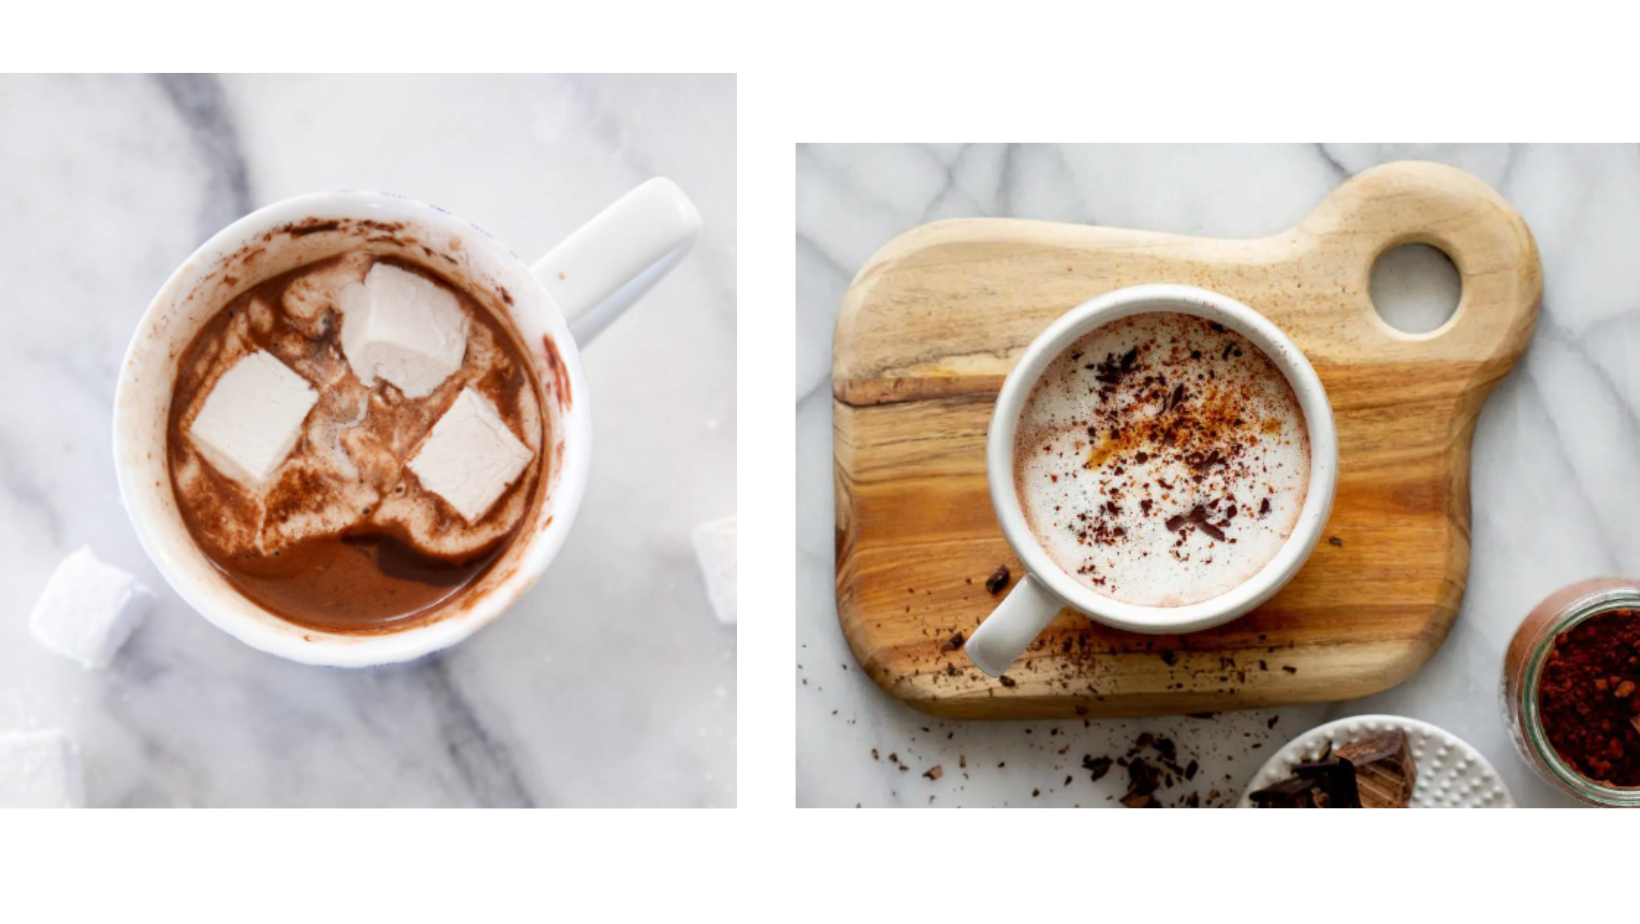 How to make a rich & frothy hot chocolate